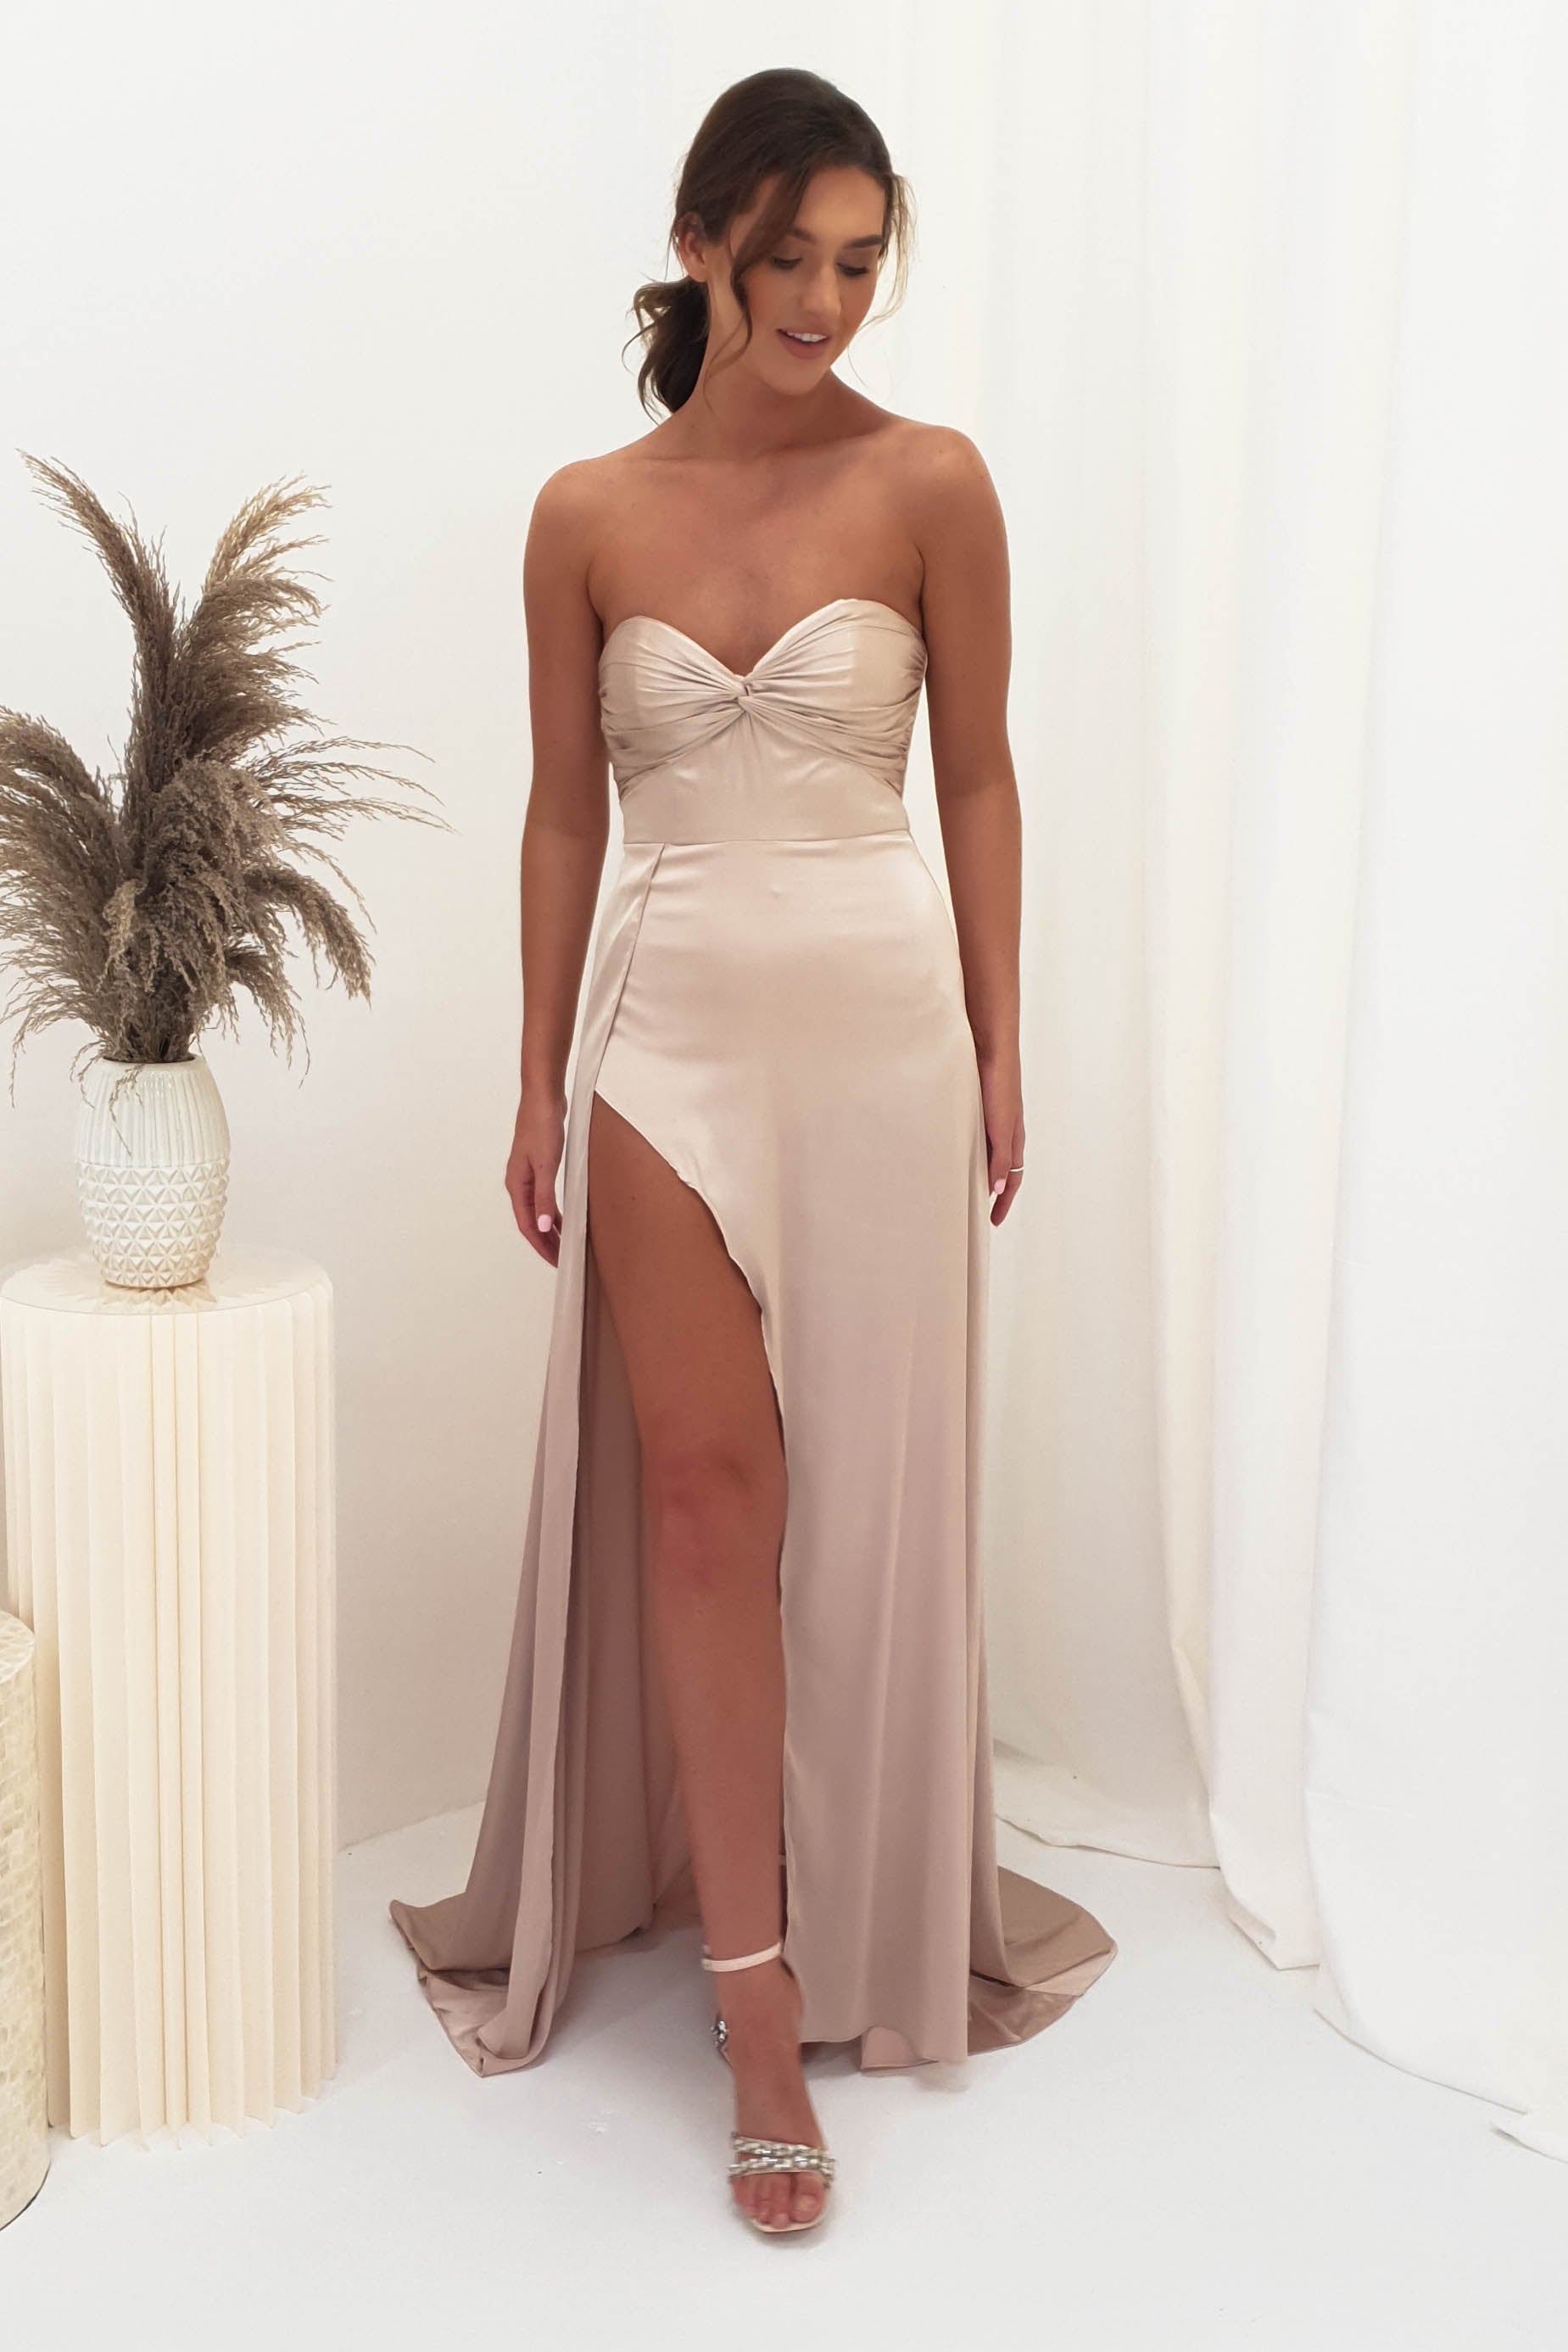 done-517002-strapless-high-slit-gown-champagne-f-p-dress-50126483128661.jpg